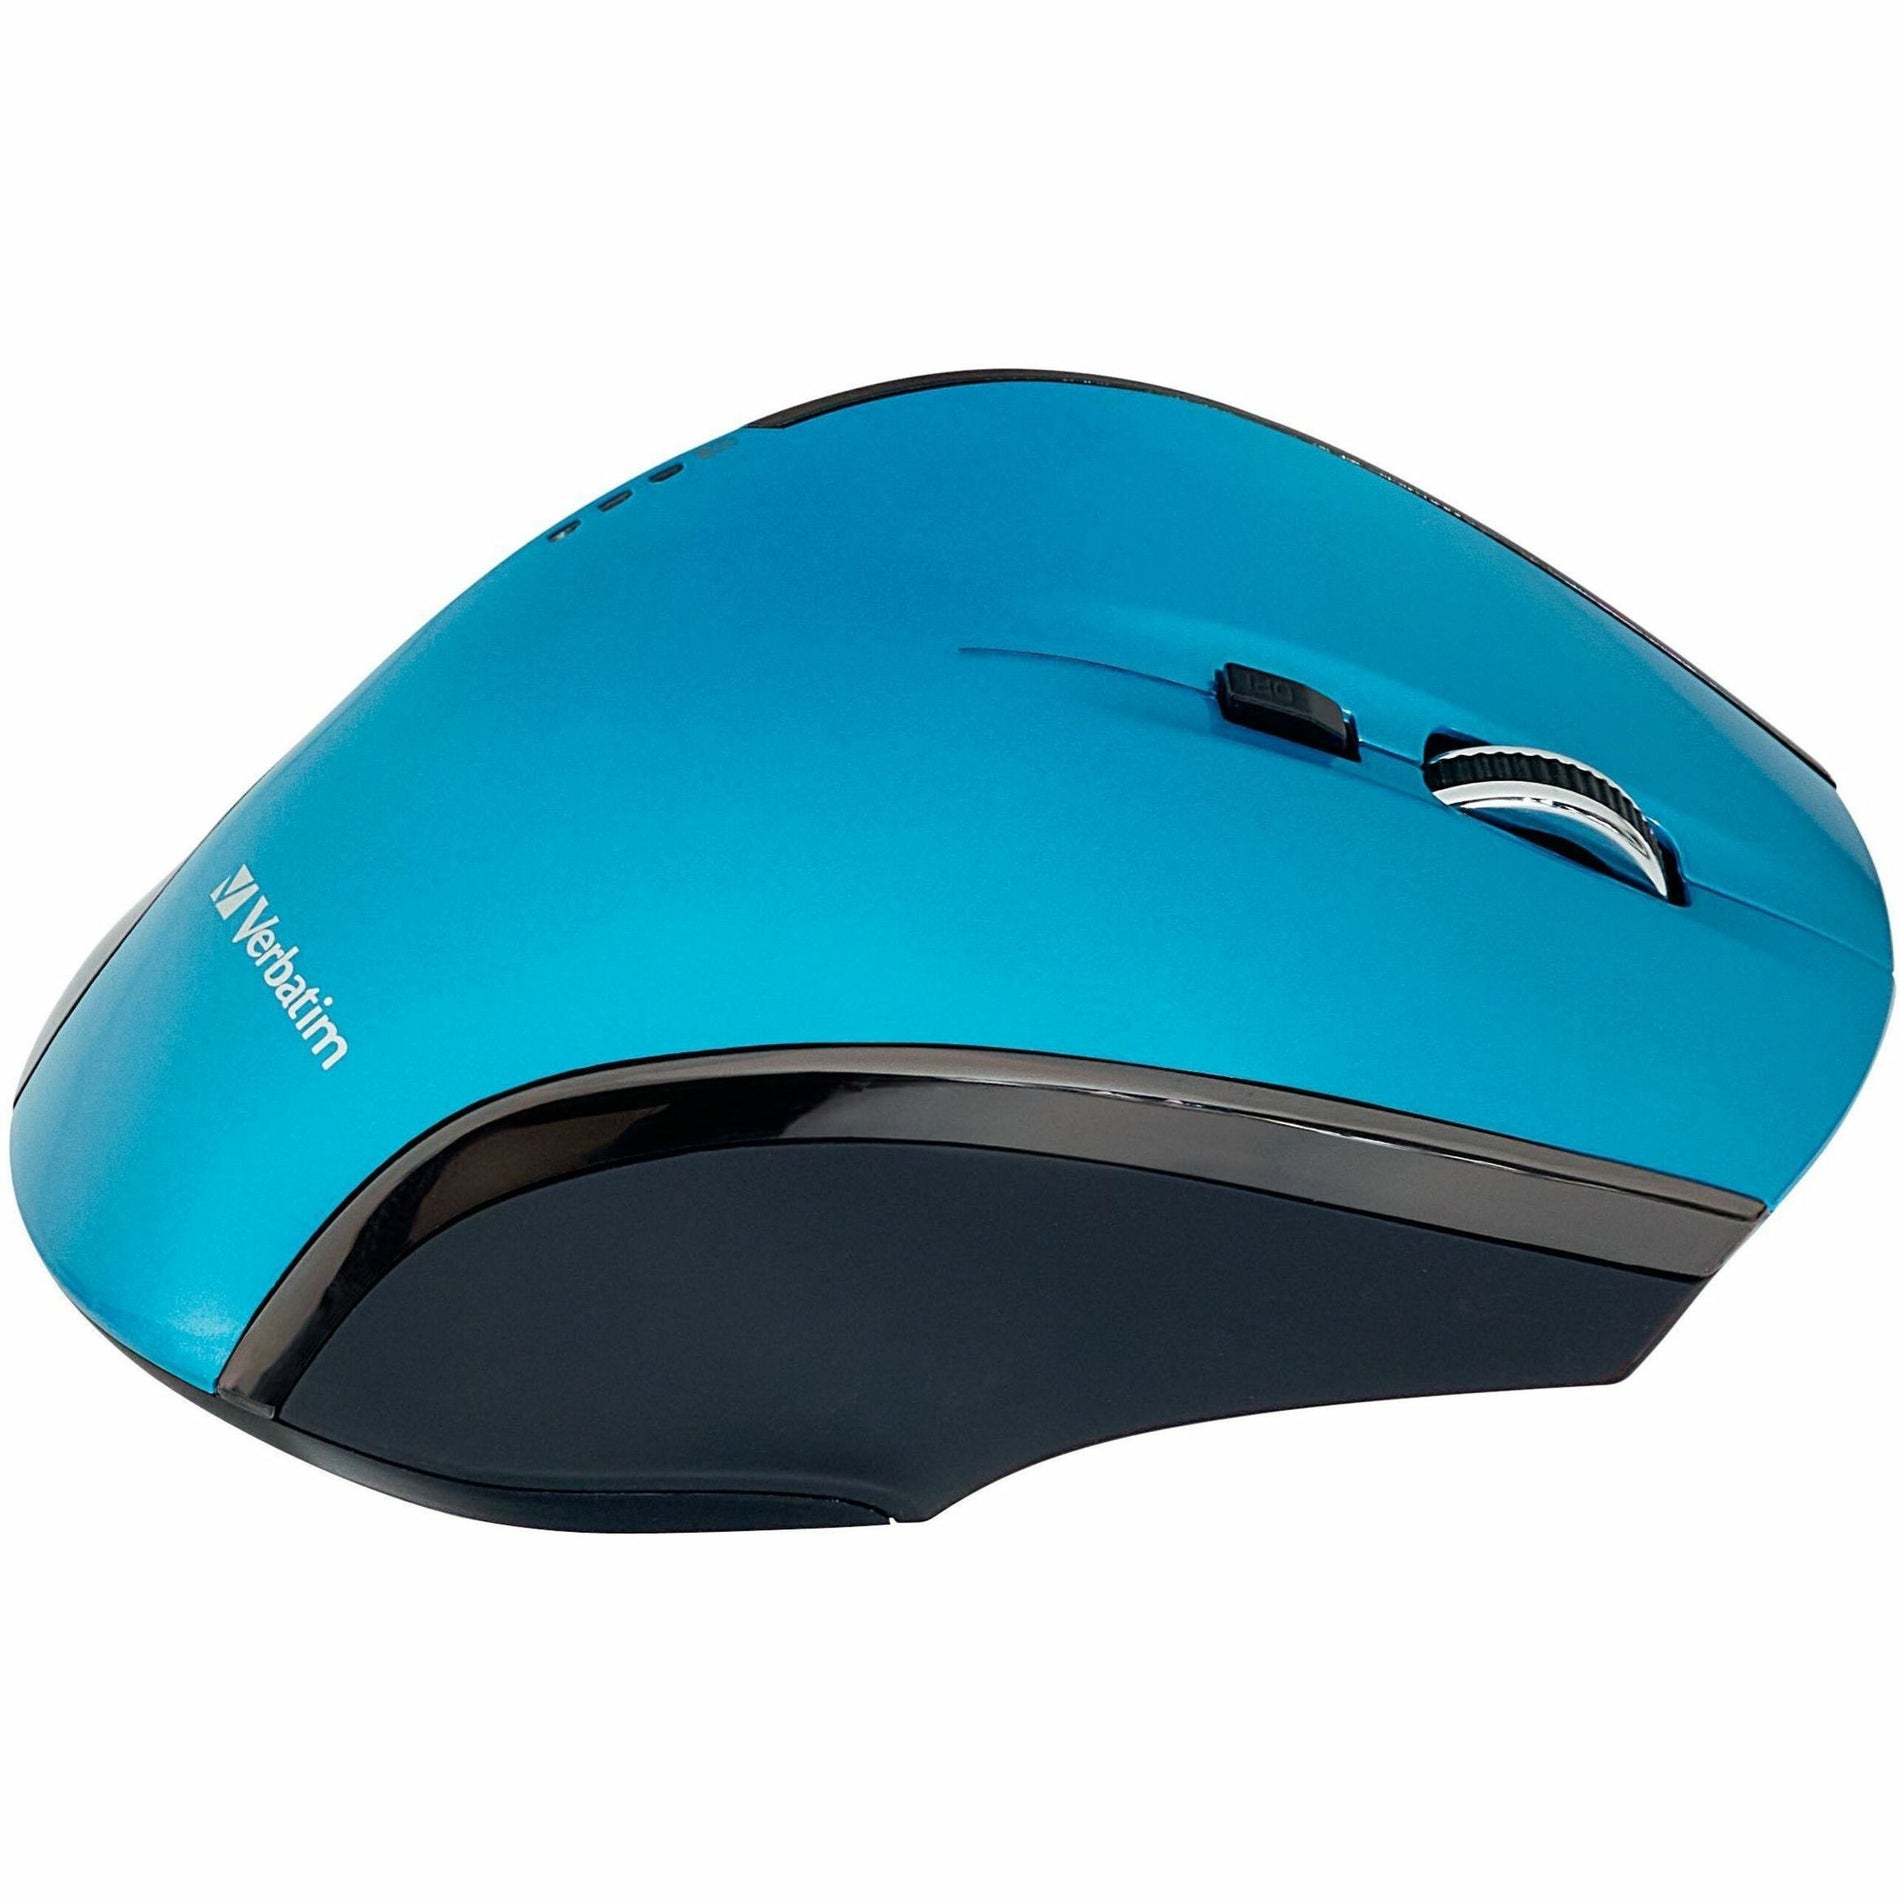 Verbatim 99019 Wireless Desktop 8-Button Deluxe Mouse, Blue LED, Radio Frequency